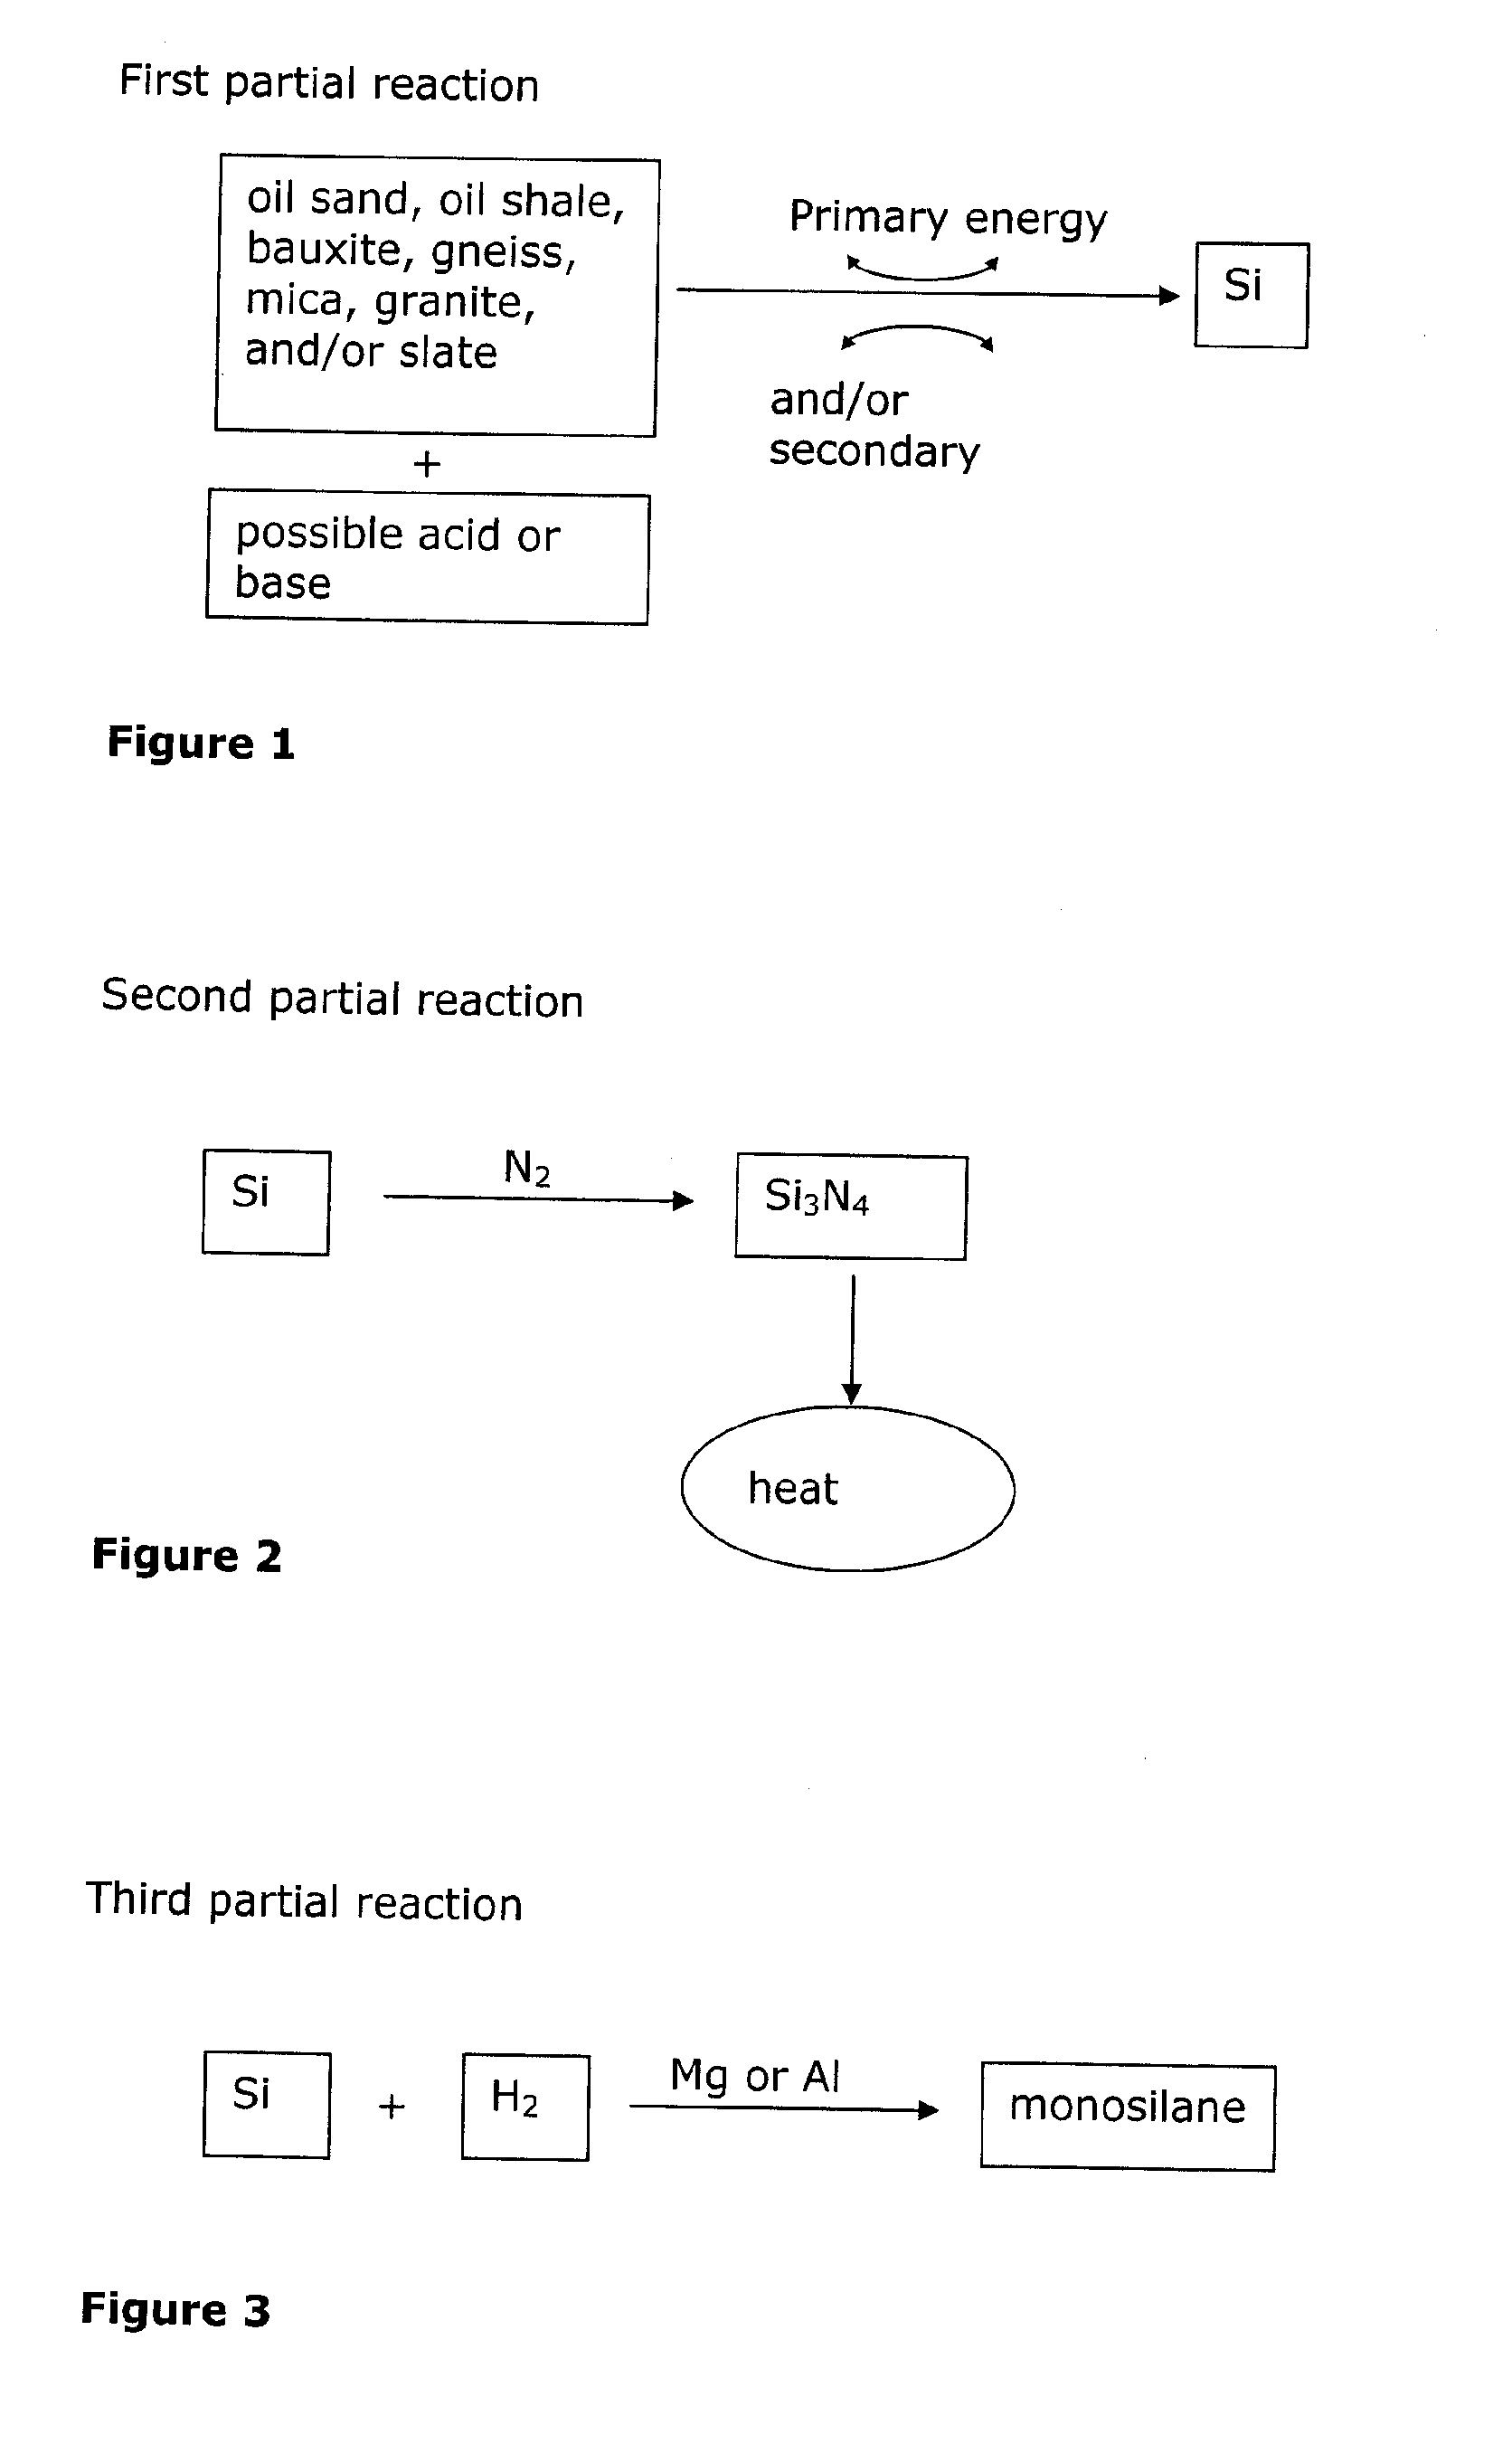 Novel cascaded power plant process and method for providing reversibly usable hydrogen carriers in such a power plant process